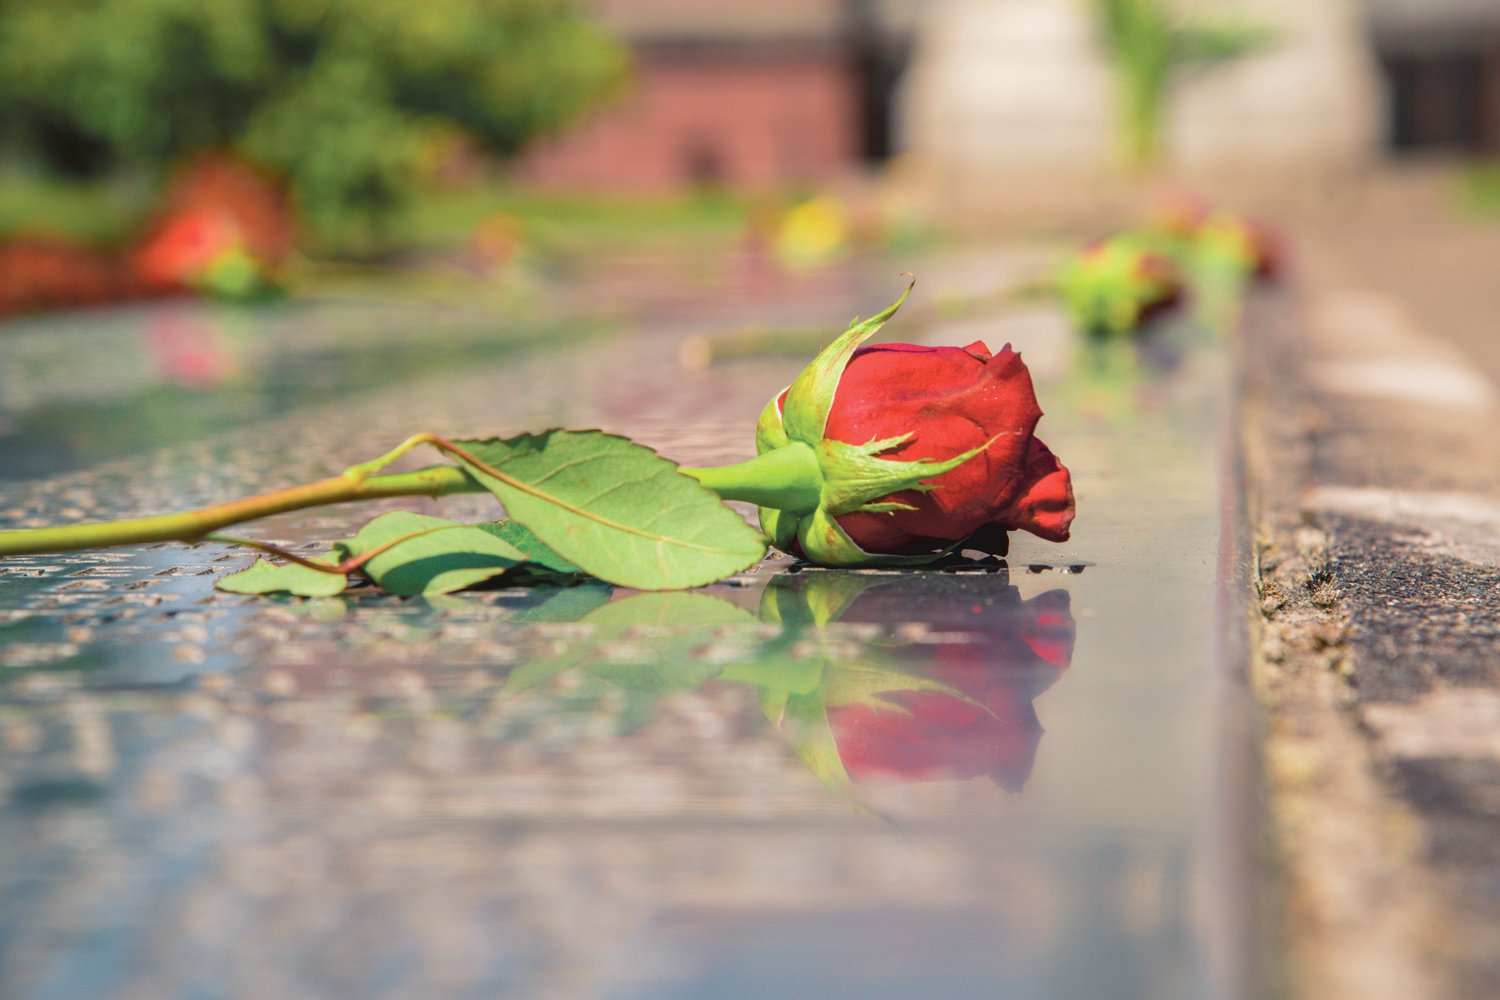 A red rose is seen on a memorial for local fallen soldiers. It was placed at George Washington Park by Mary Astrid of the Purple Heart Committee on Memorial Day.